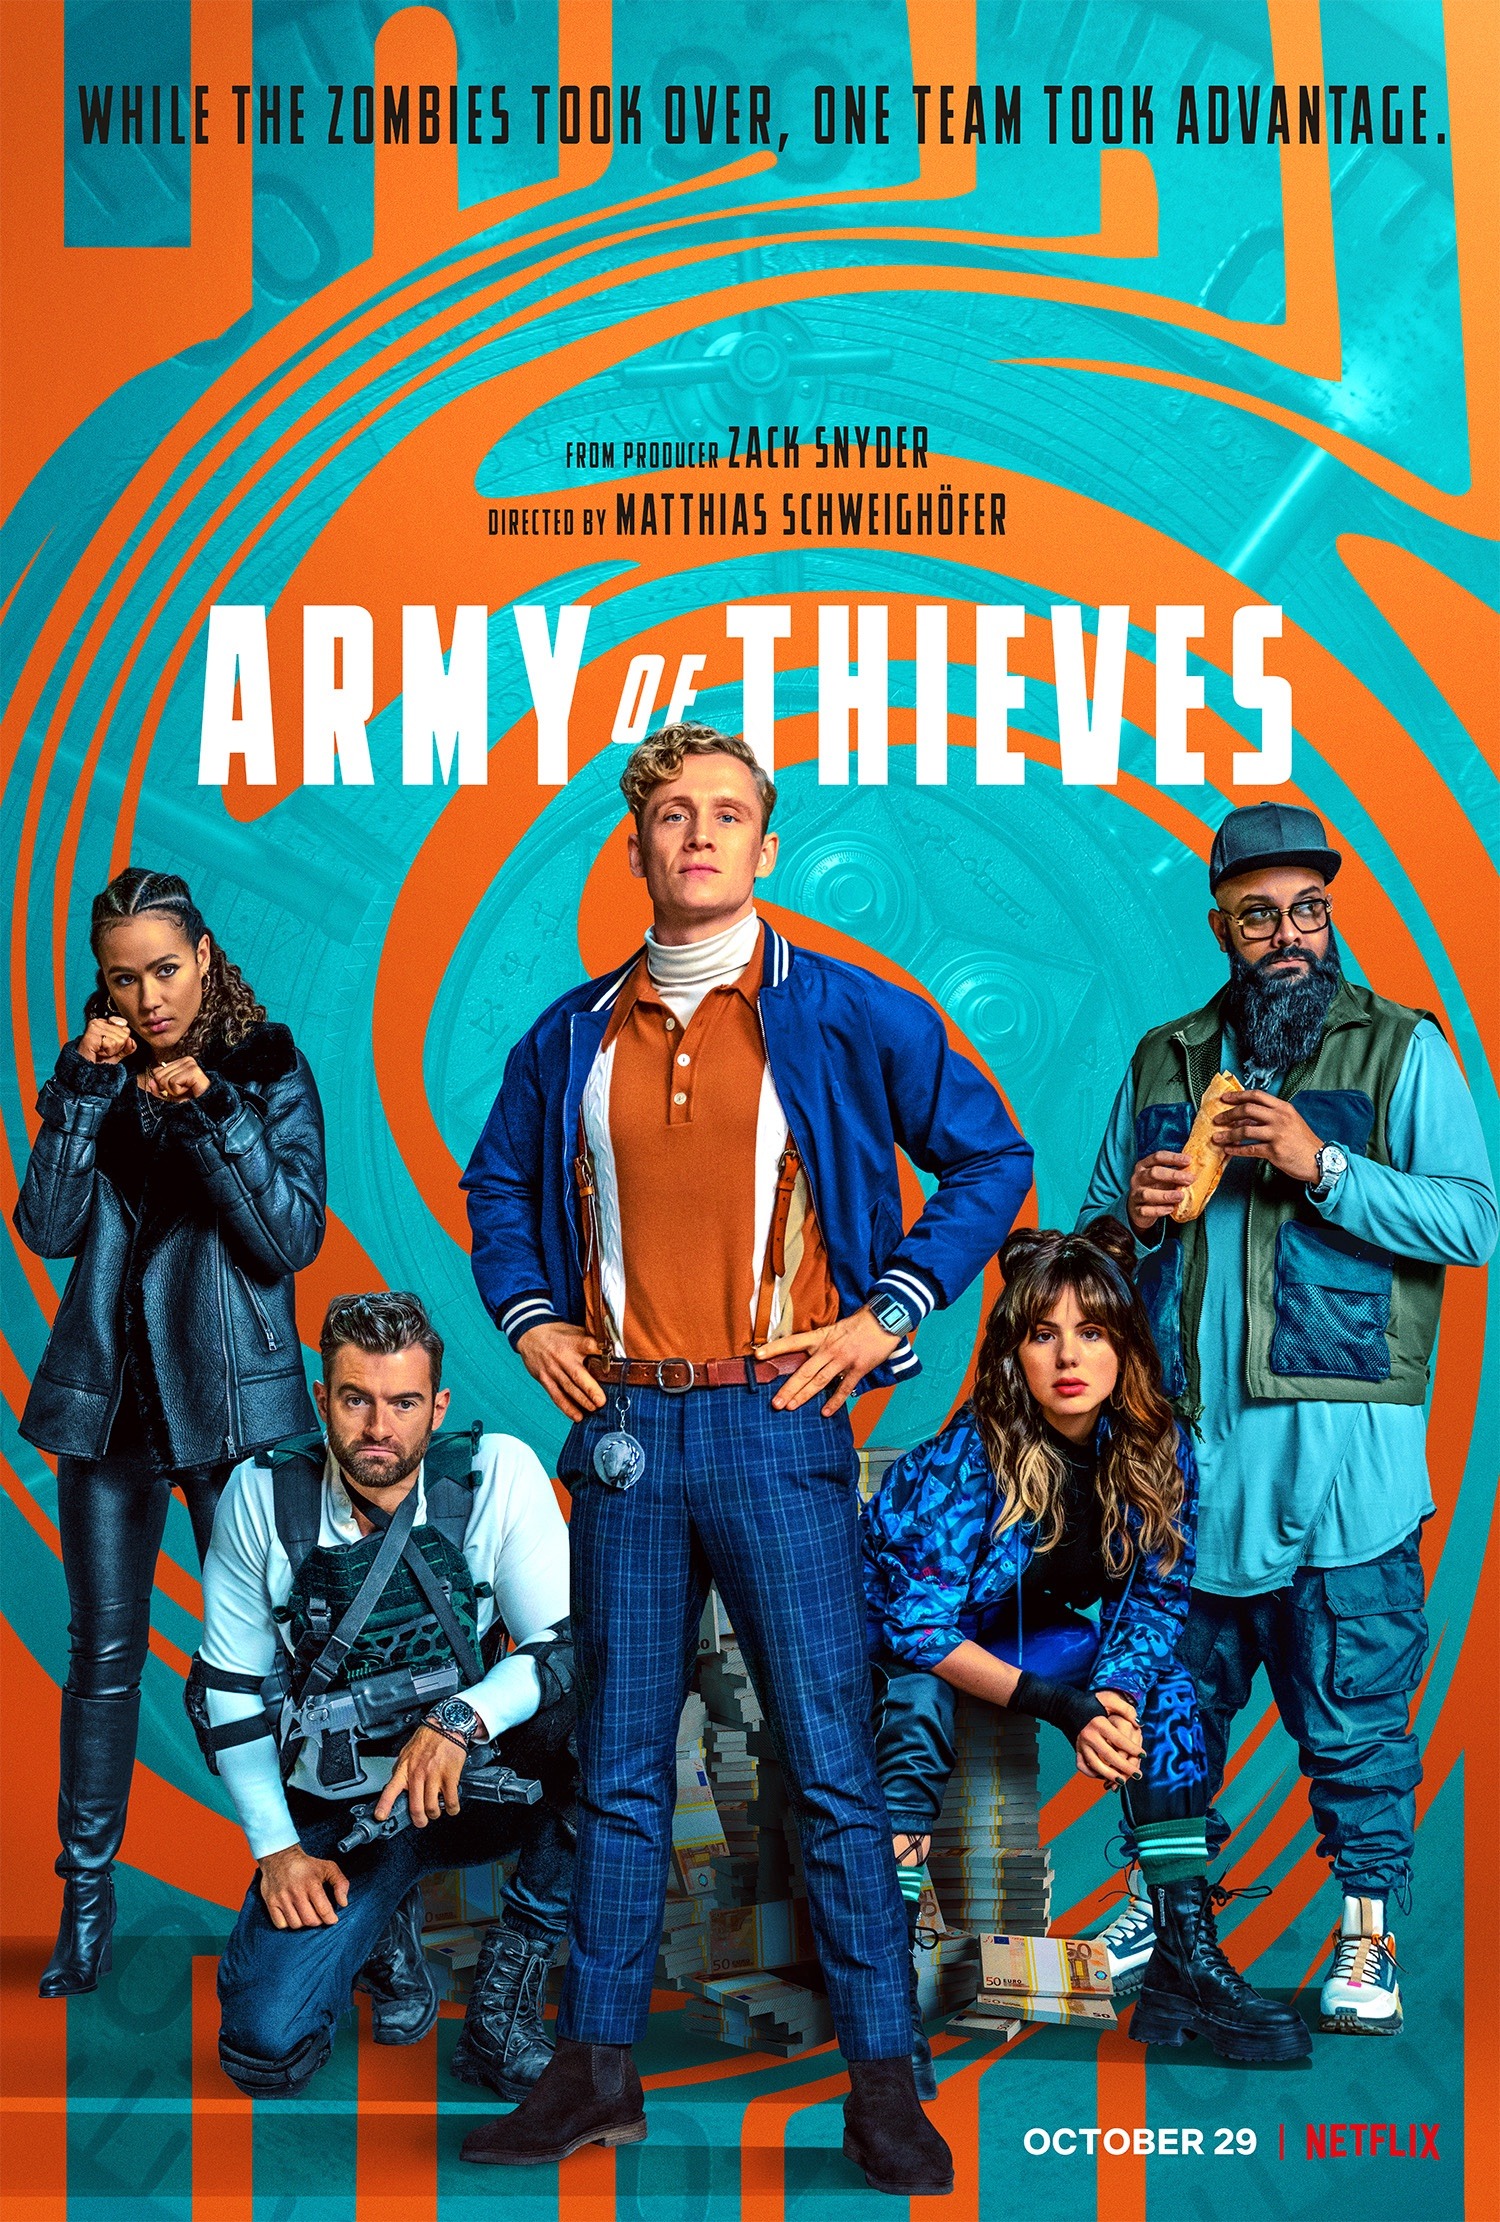 Army of Thieves (2021) Poster - While the zombies took over, one team took advantage.